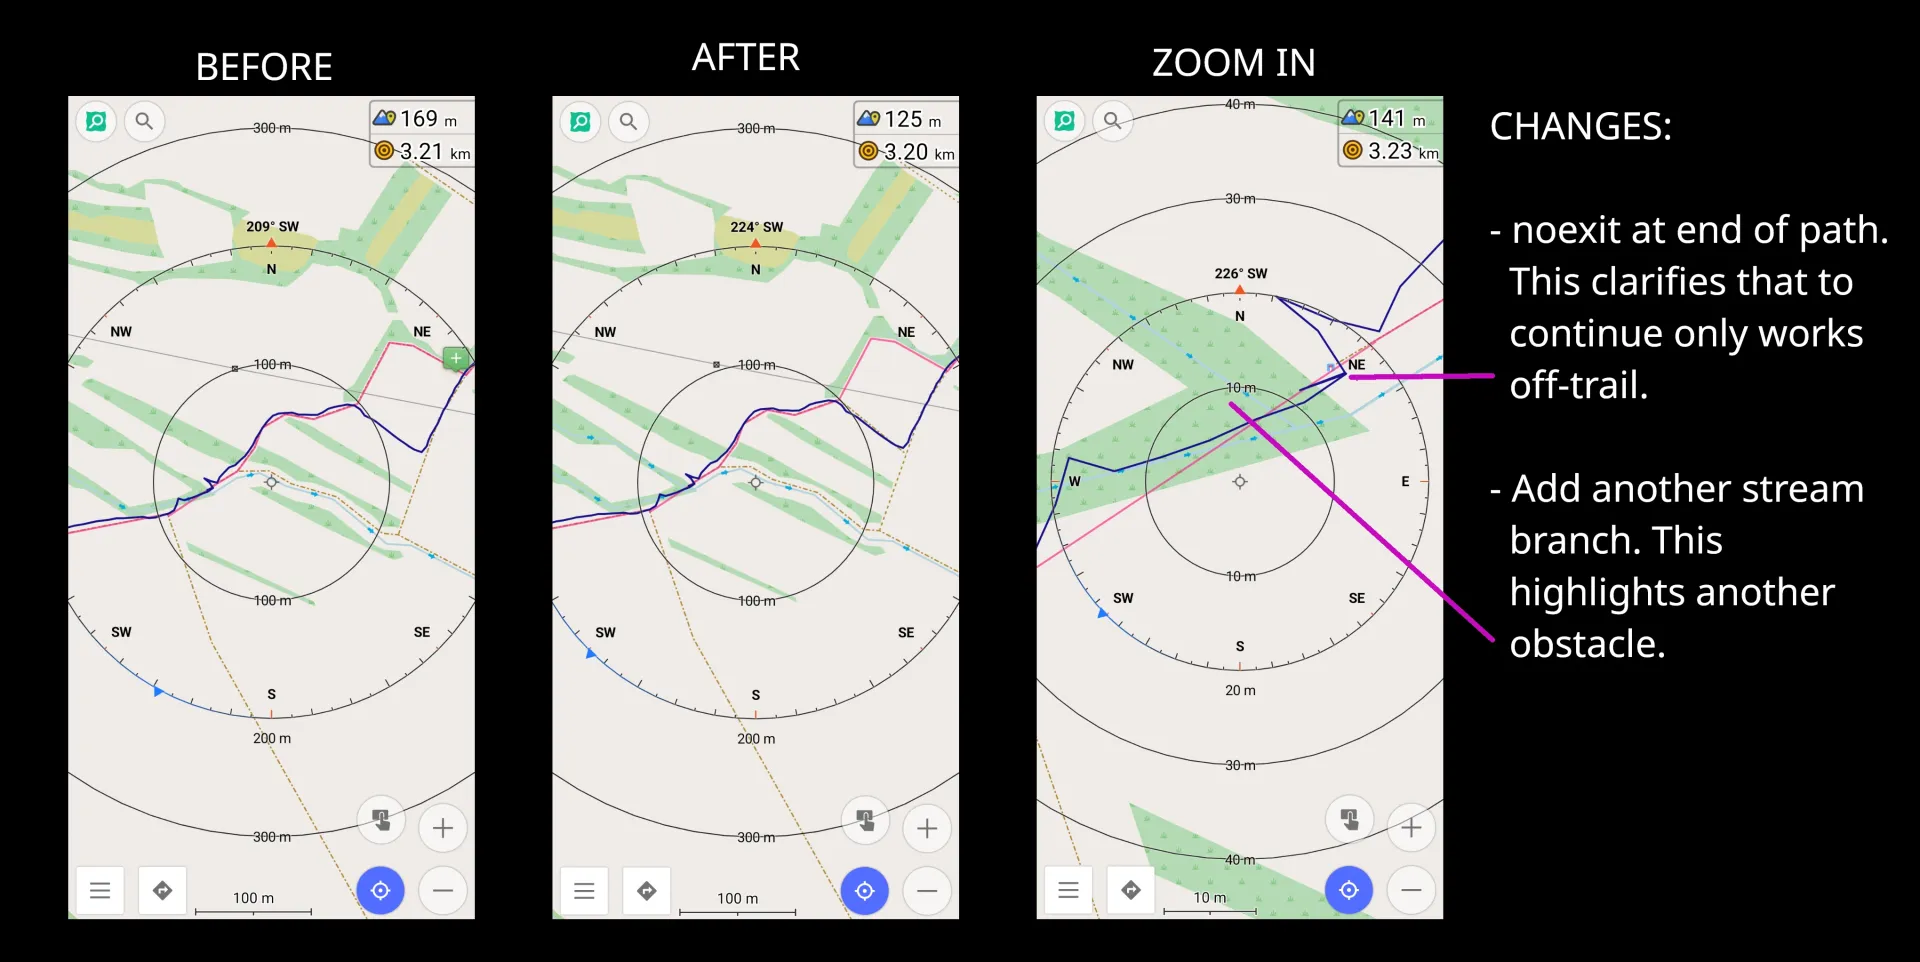 Highlights of OSM changes: add 'noexit' to path tail; add missing stream